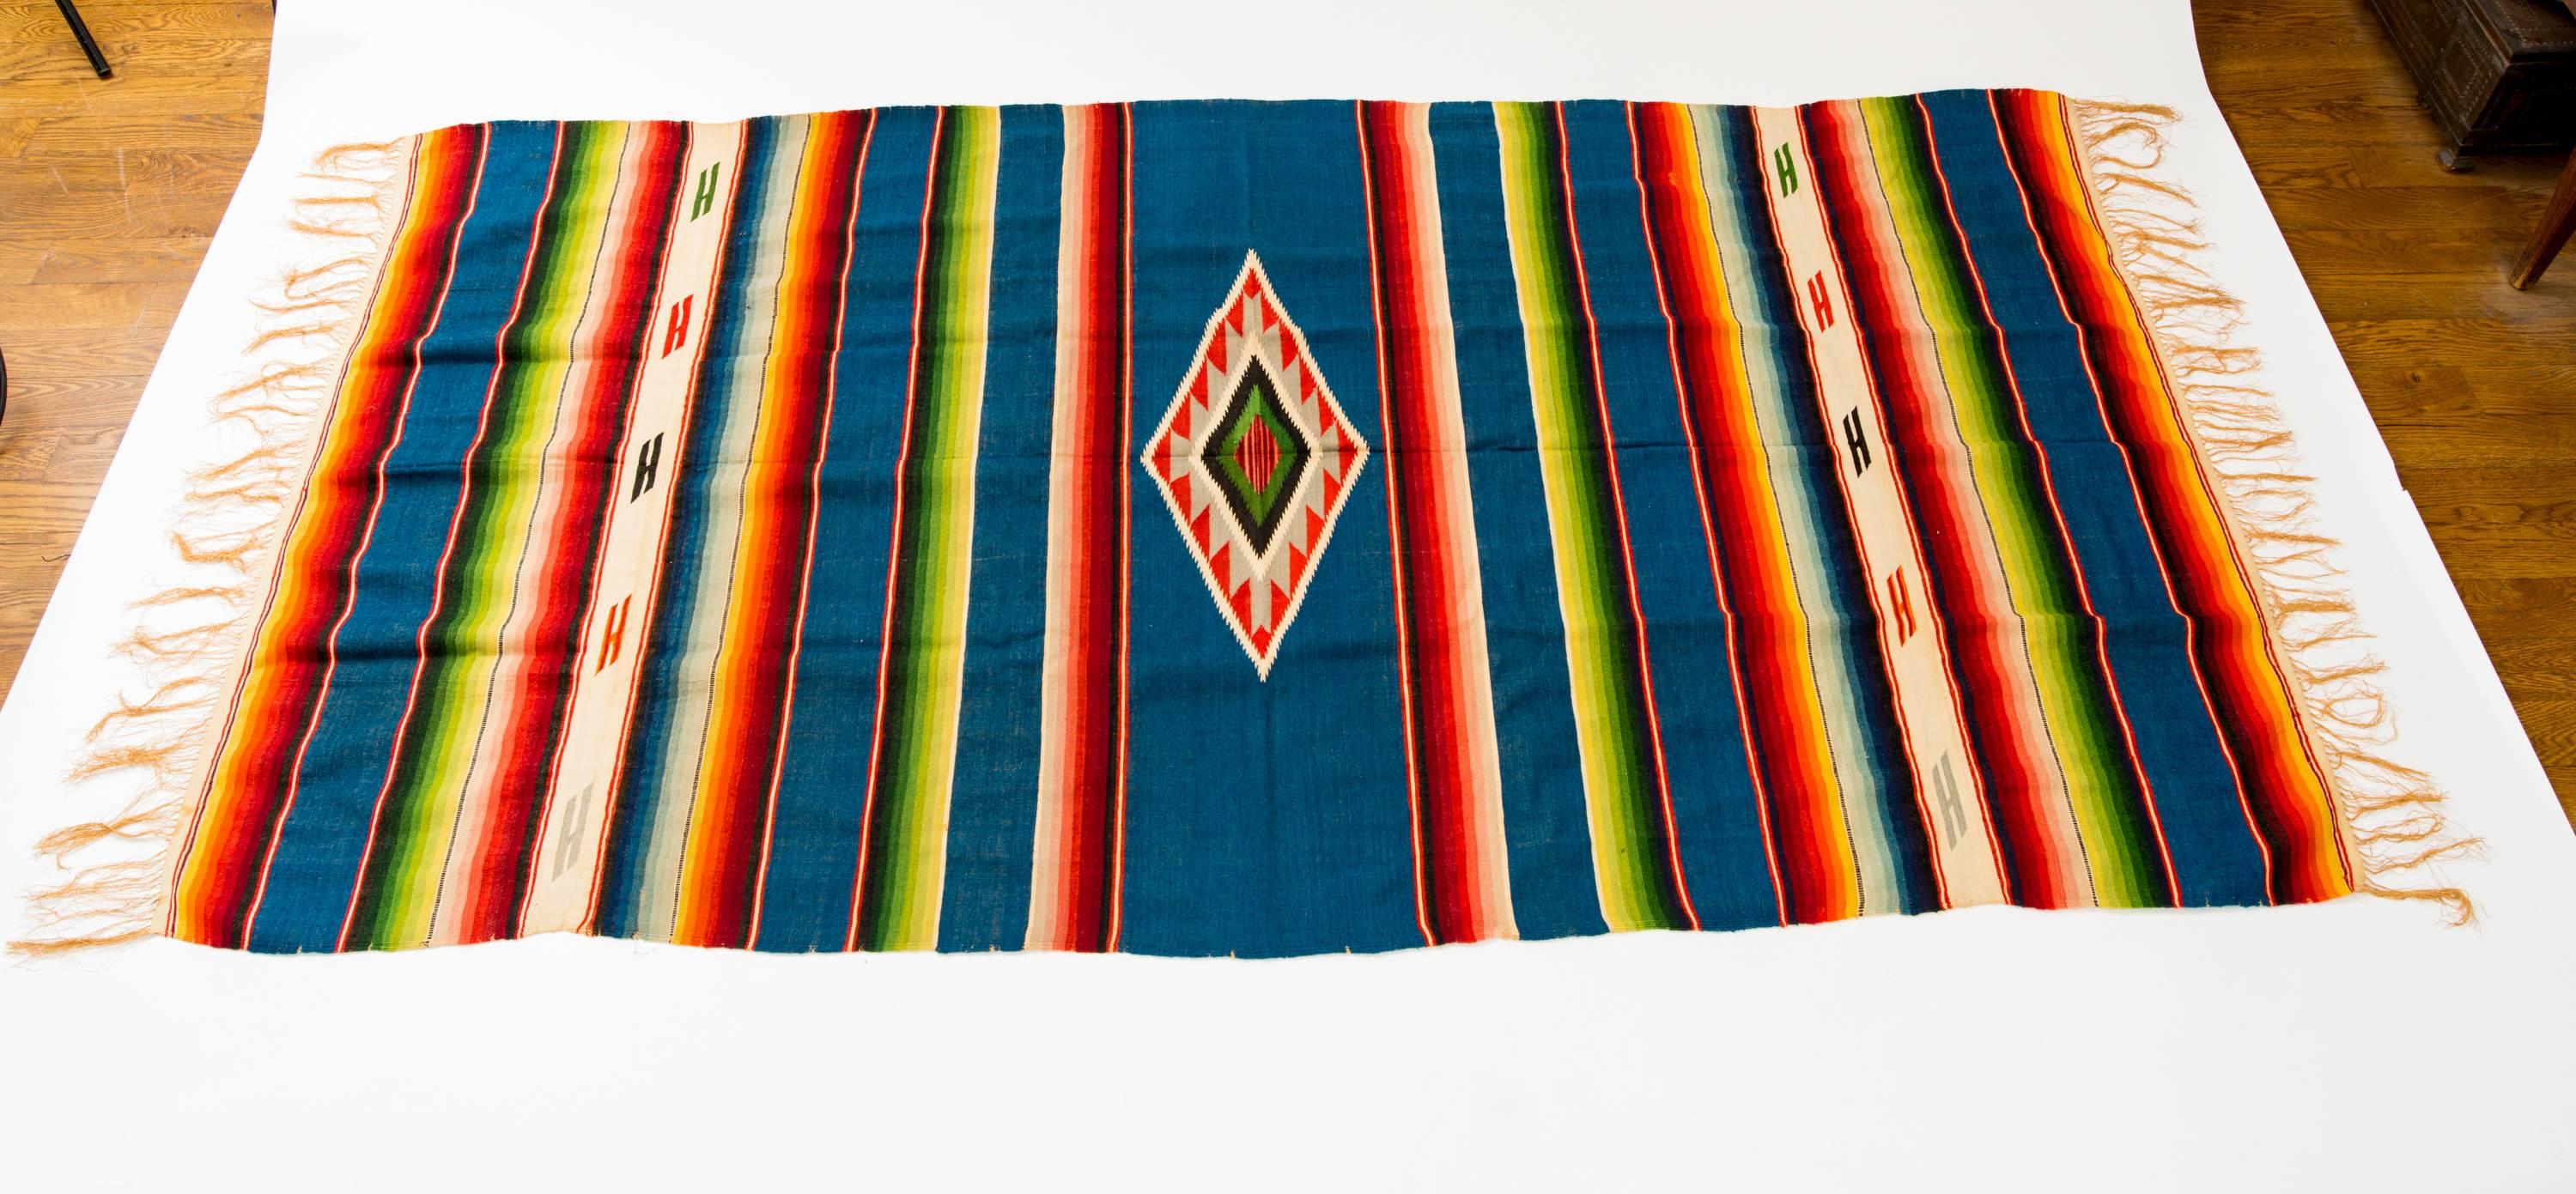 Finely handwoven multi-color stripe Saltillo serape with large central diamond woven on turquoise background, Mexico, circa 1940s.